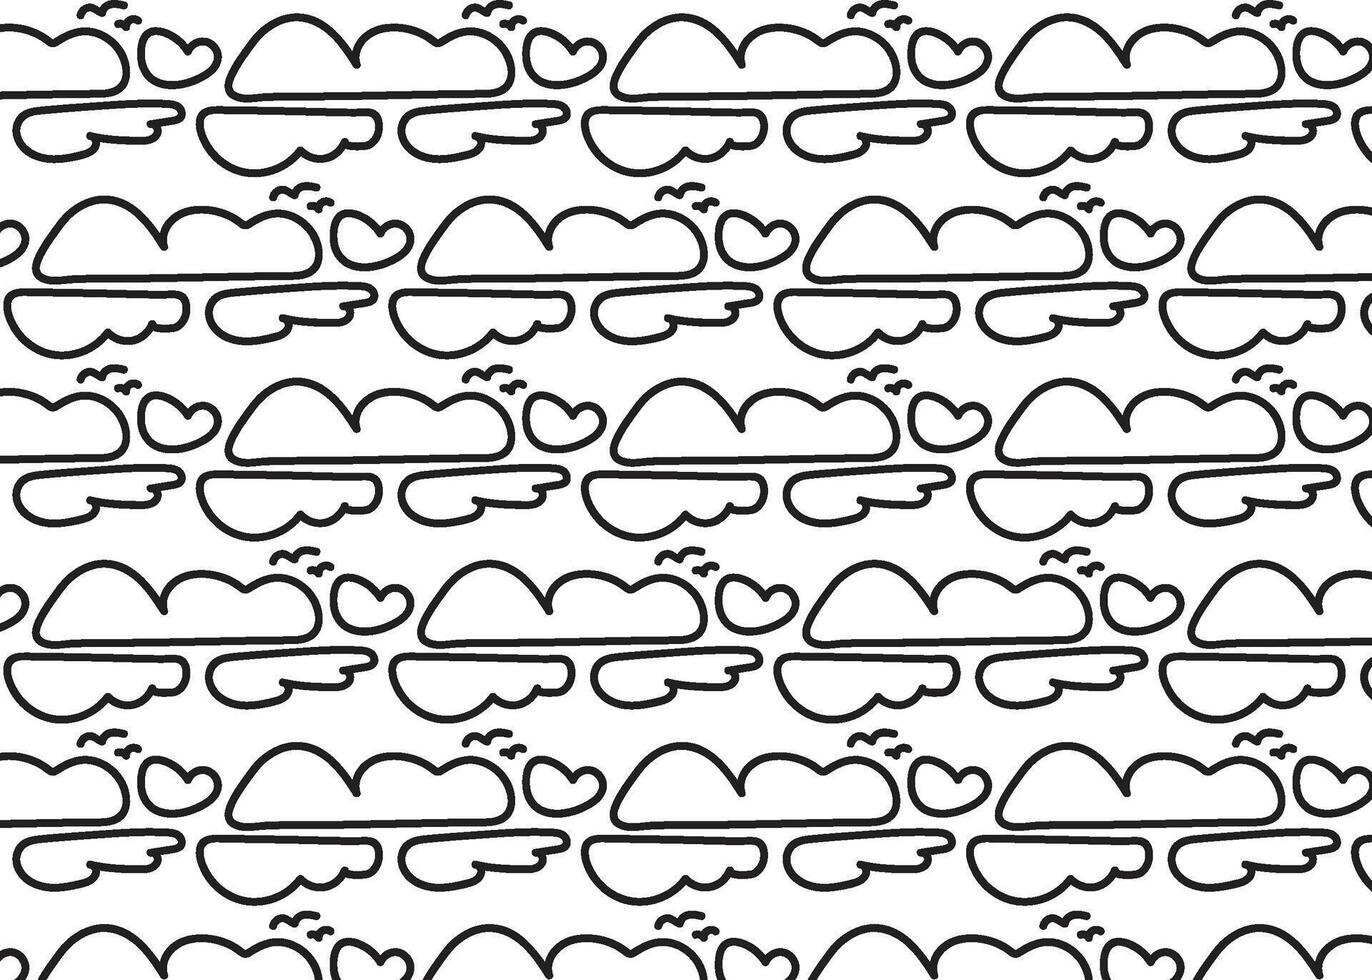 black and white doodle cloud patter background vector